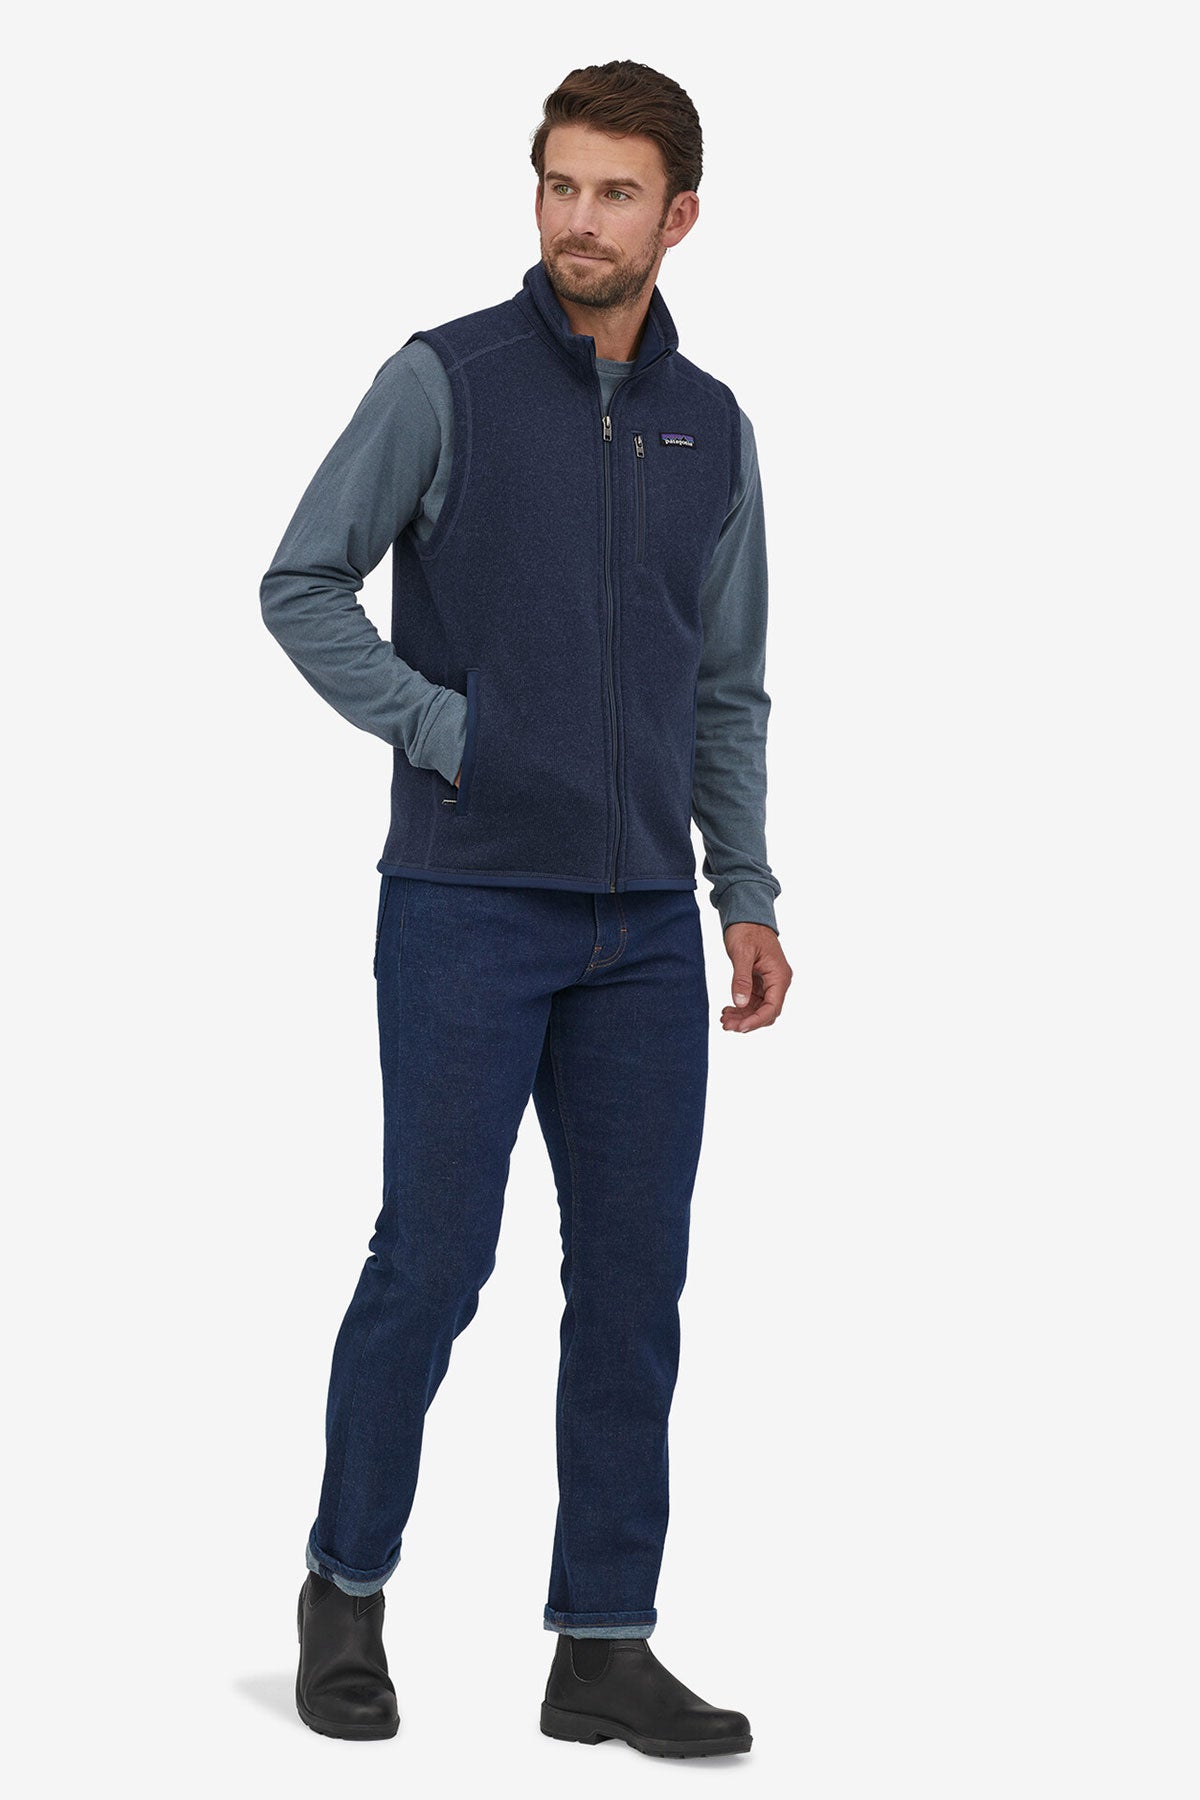 Patagonia Mens Sweater Vest, New Navy [Coinbase]